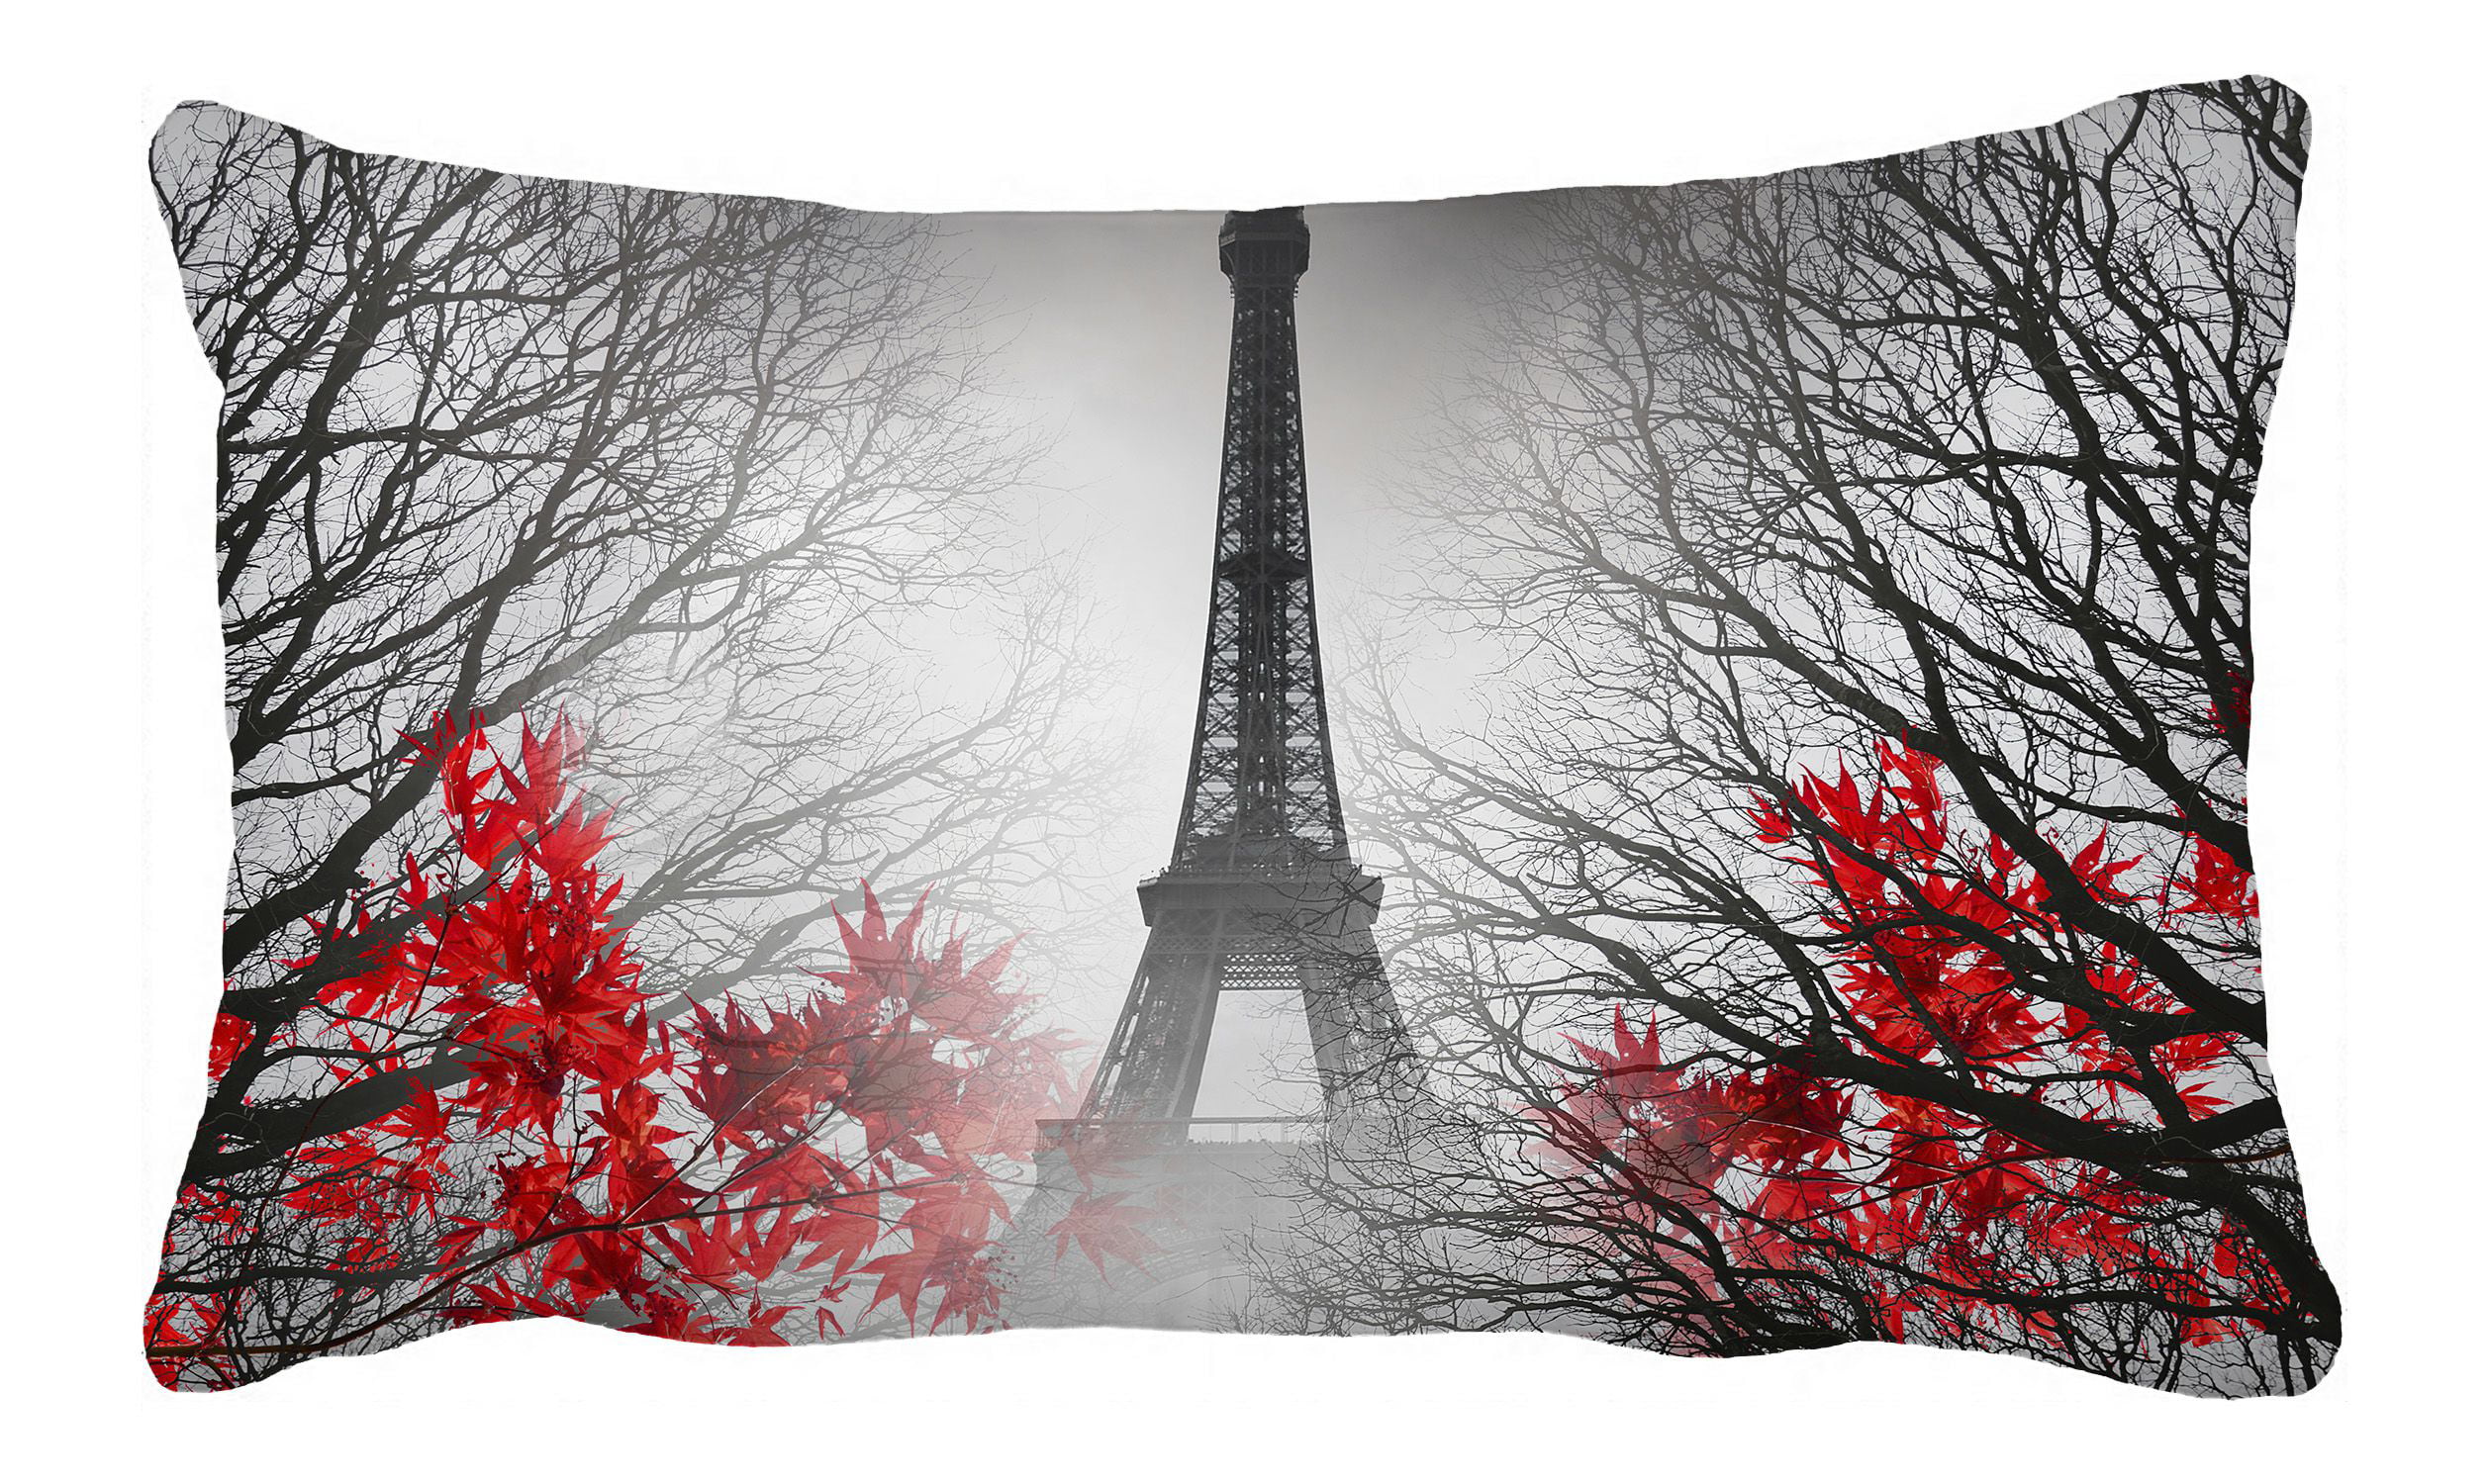 InterestPrint Ultra Soft Throw Blankets for Couch Bed and Living Room France Landmark Eiffel Tower